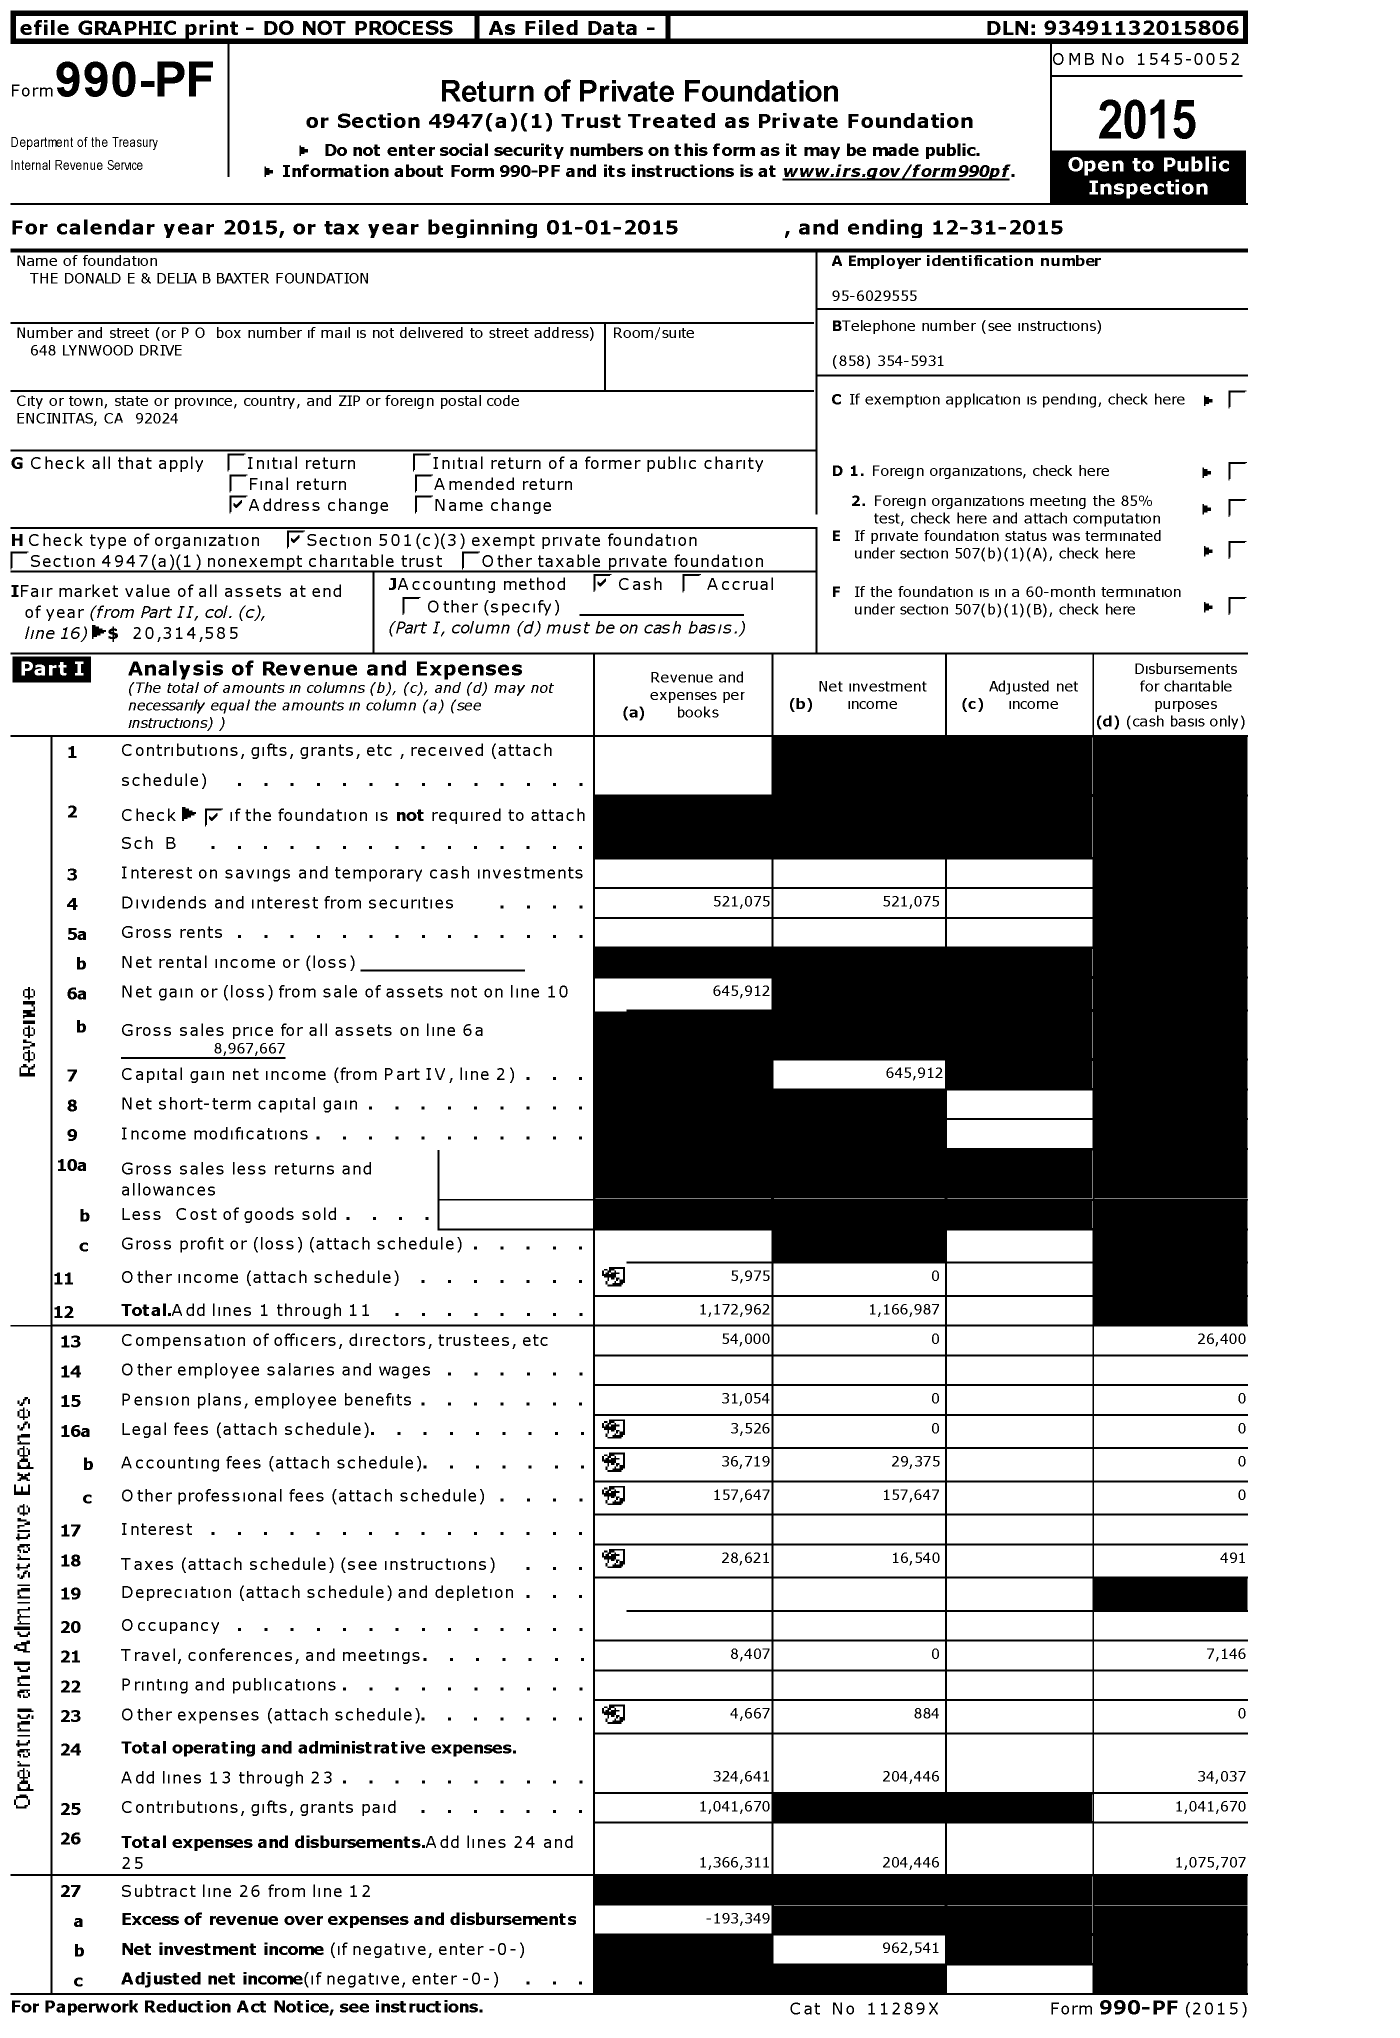 Image of first page of 2015 Form 990PF for The Donald E and Delia B Baxter Foundation